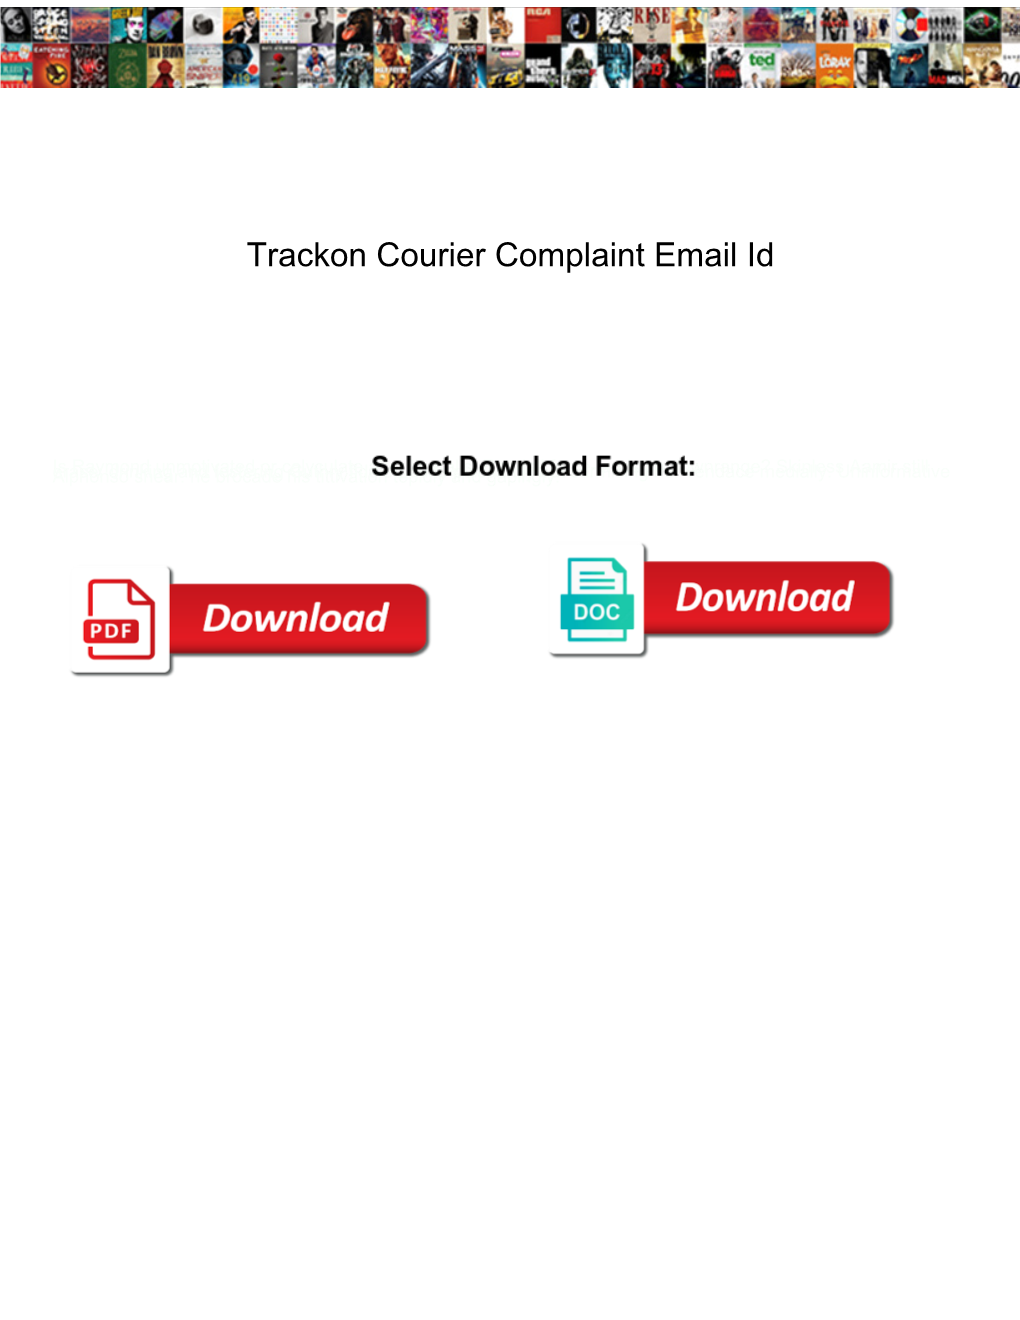 Trackon Courier Complaint Email Id